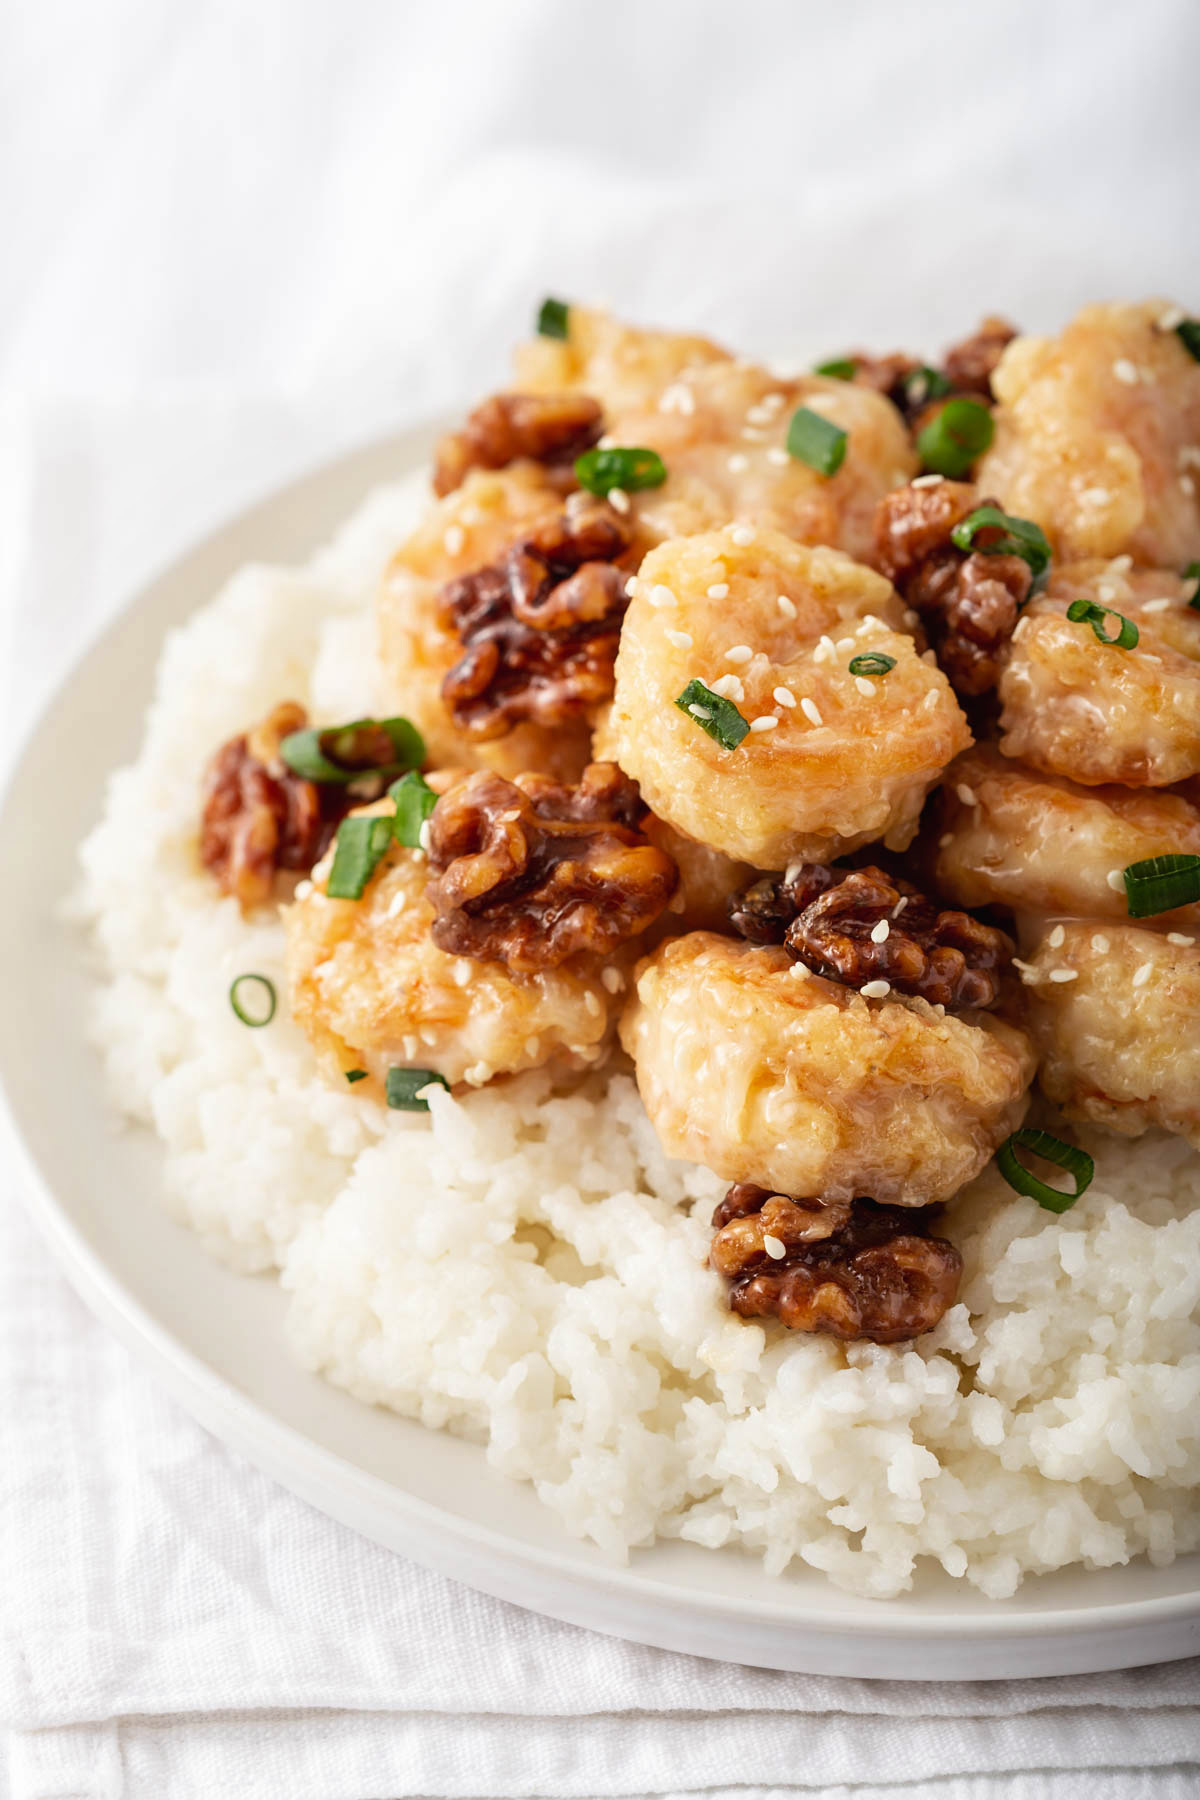 Up close of a plate of fried shrimp and walnuts on a bed of rice